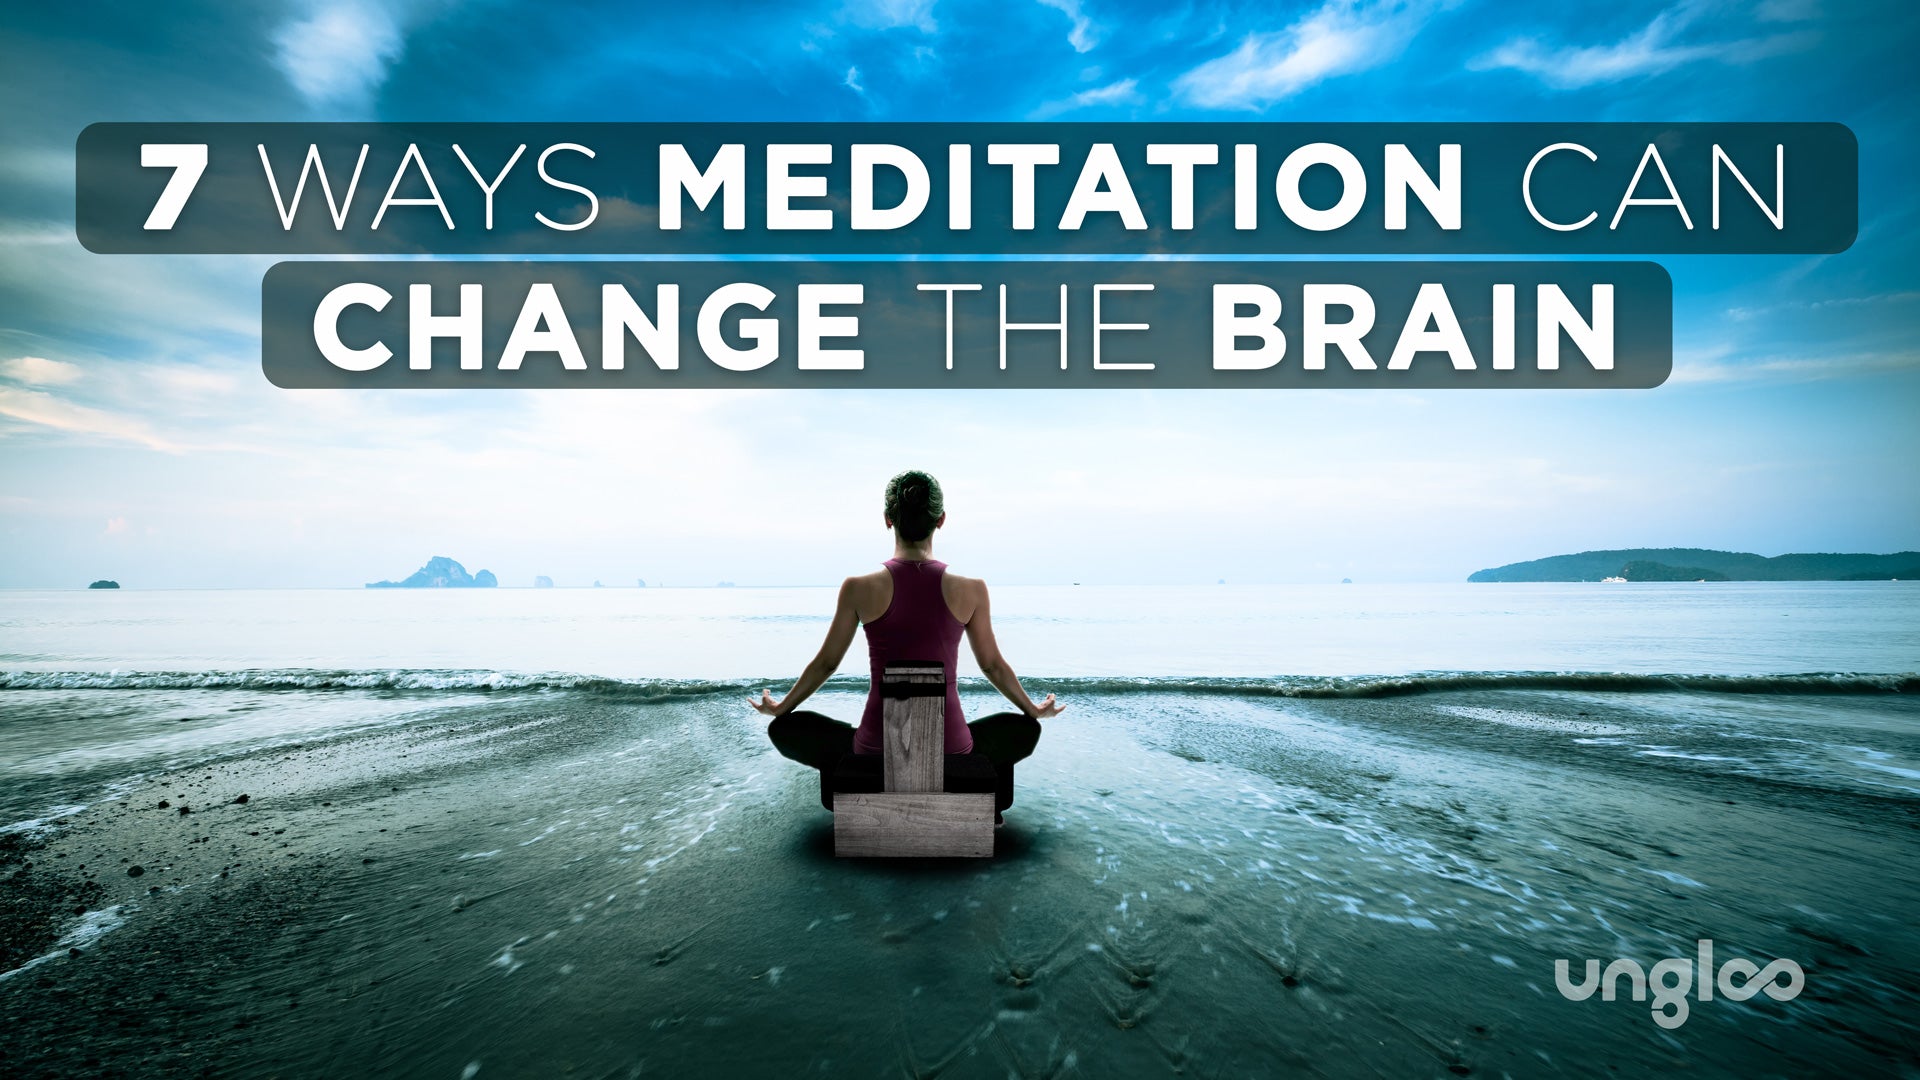 7 ways mediation can change the brain banner image with woman sitting in meditation chair